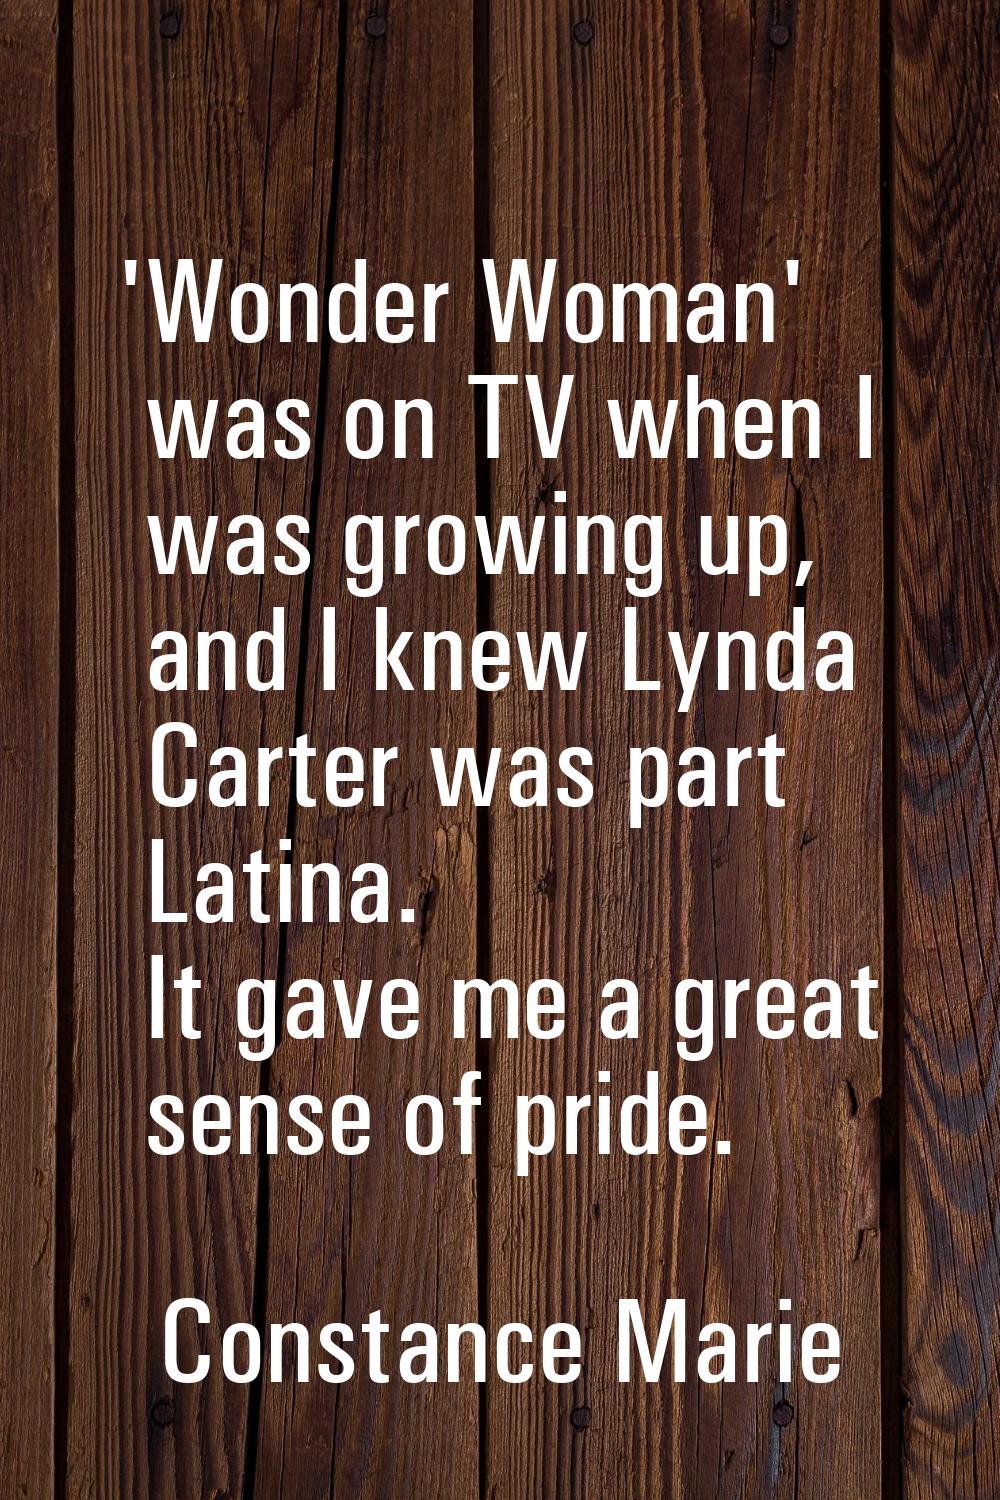 'Wonder Woman' was on TV when I was growing up, and I knew Lynda Carter was part Latina. It gave me